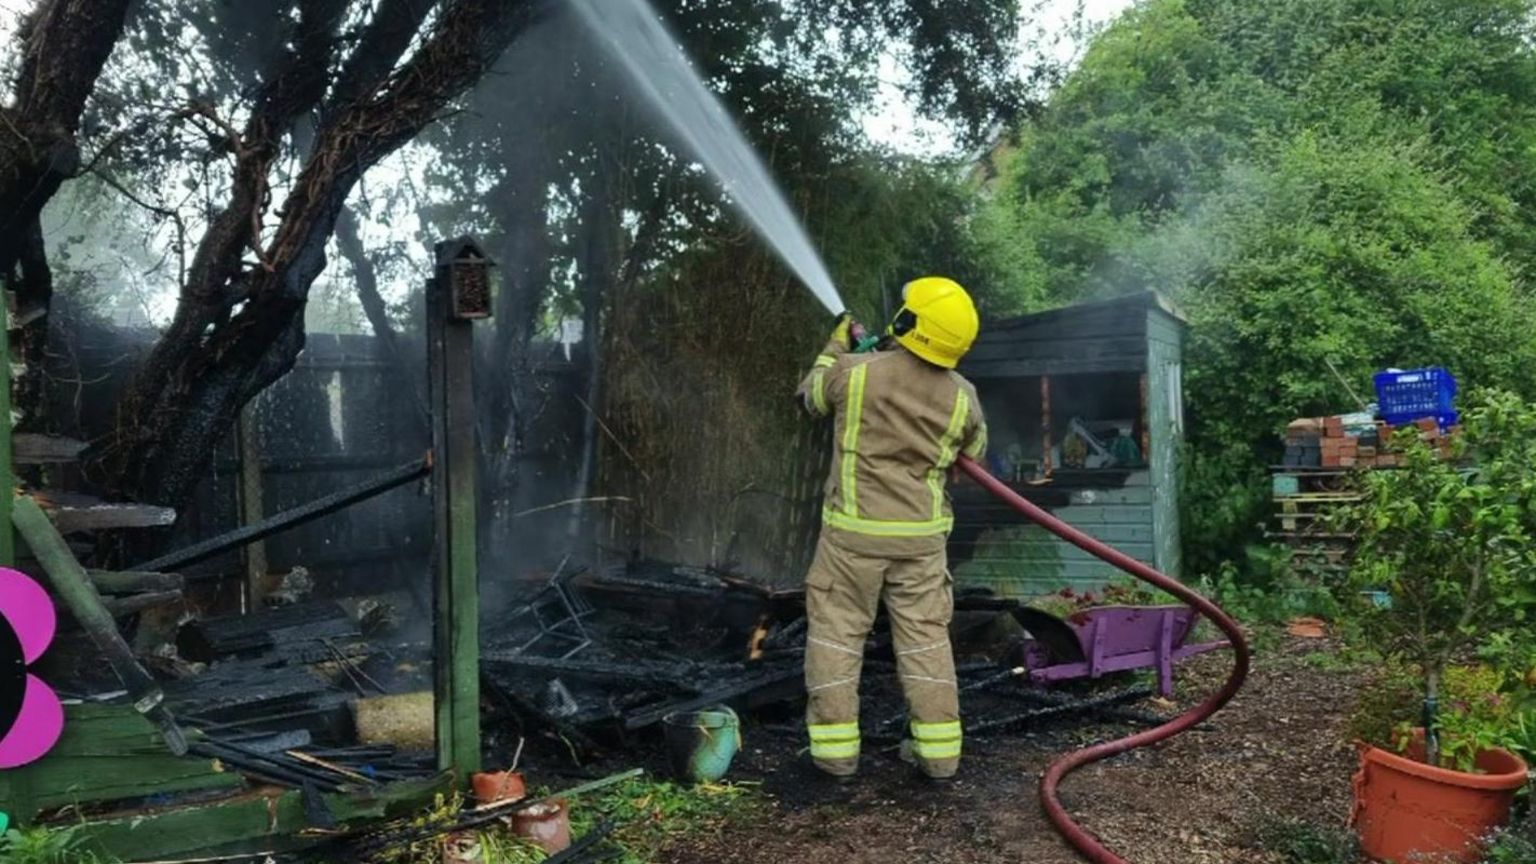 A firefighter with a hosepipe shooting water up at a tree which appears to be black from burning and the floor beneath it is also black with damaged garden items in a pile